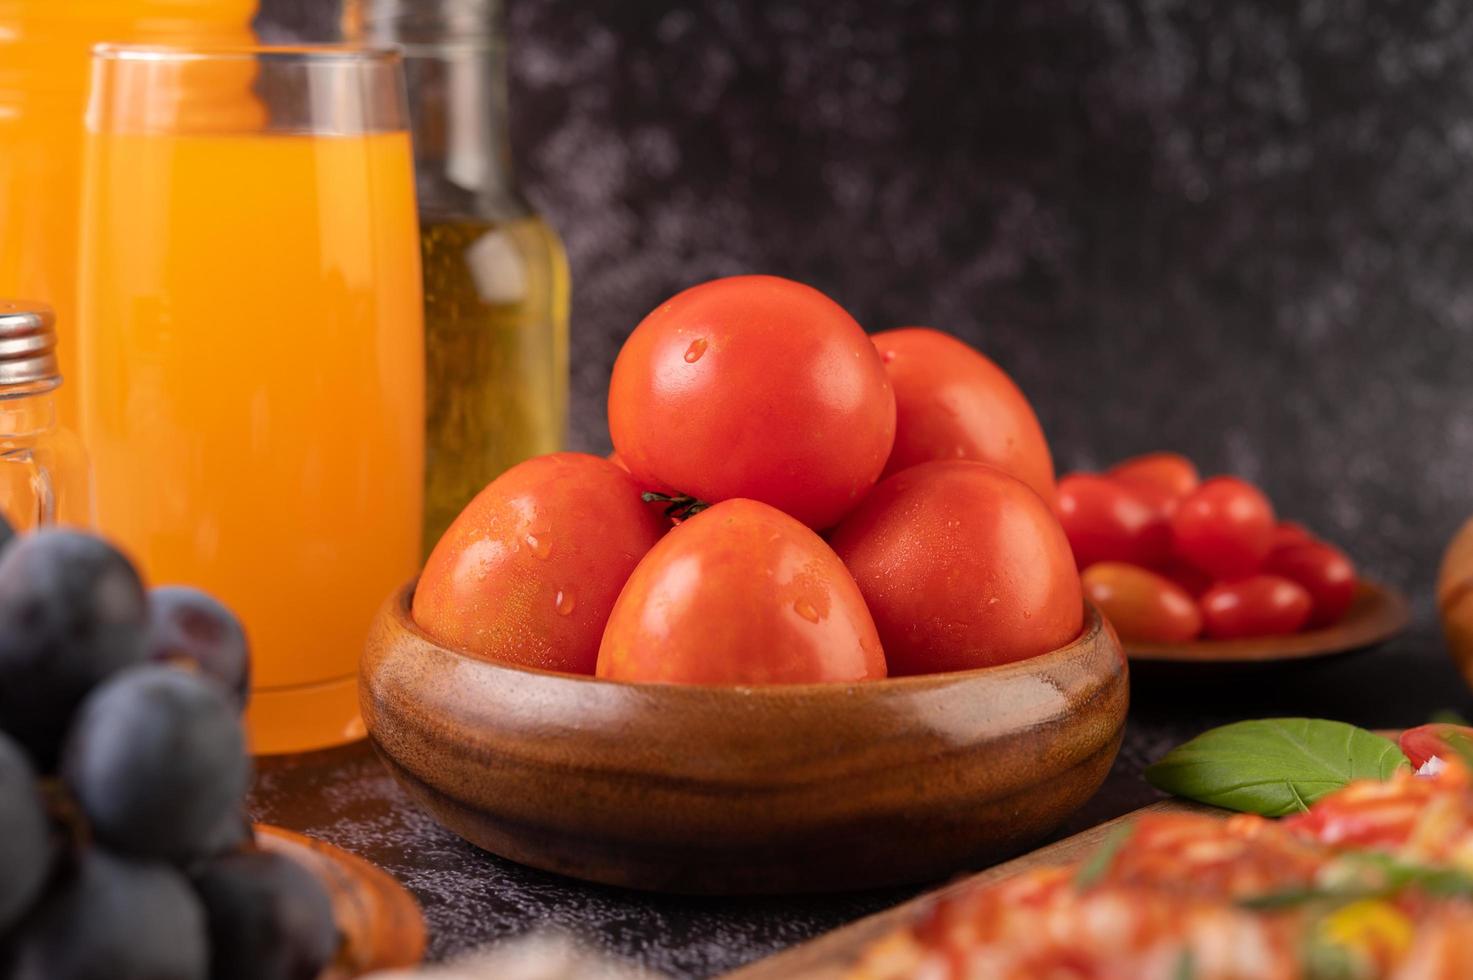 Fresh tomatoes, grapes and orange juice in a glass photo